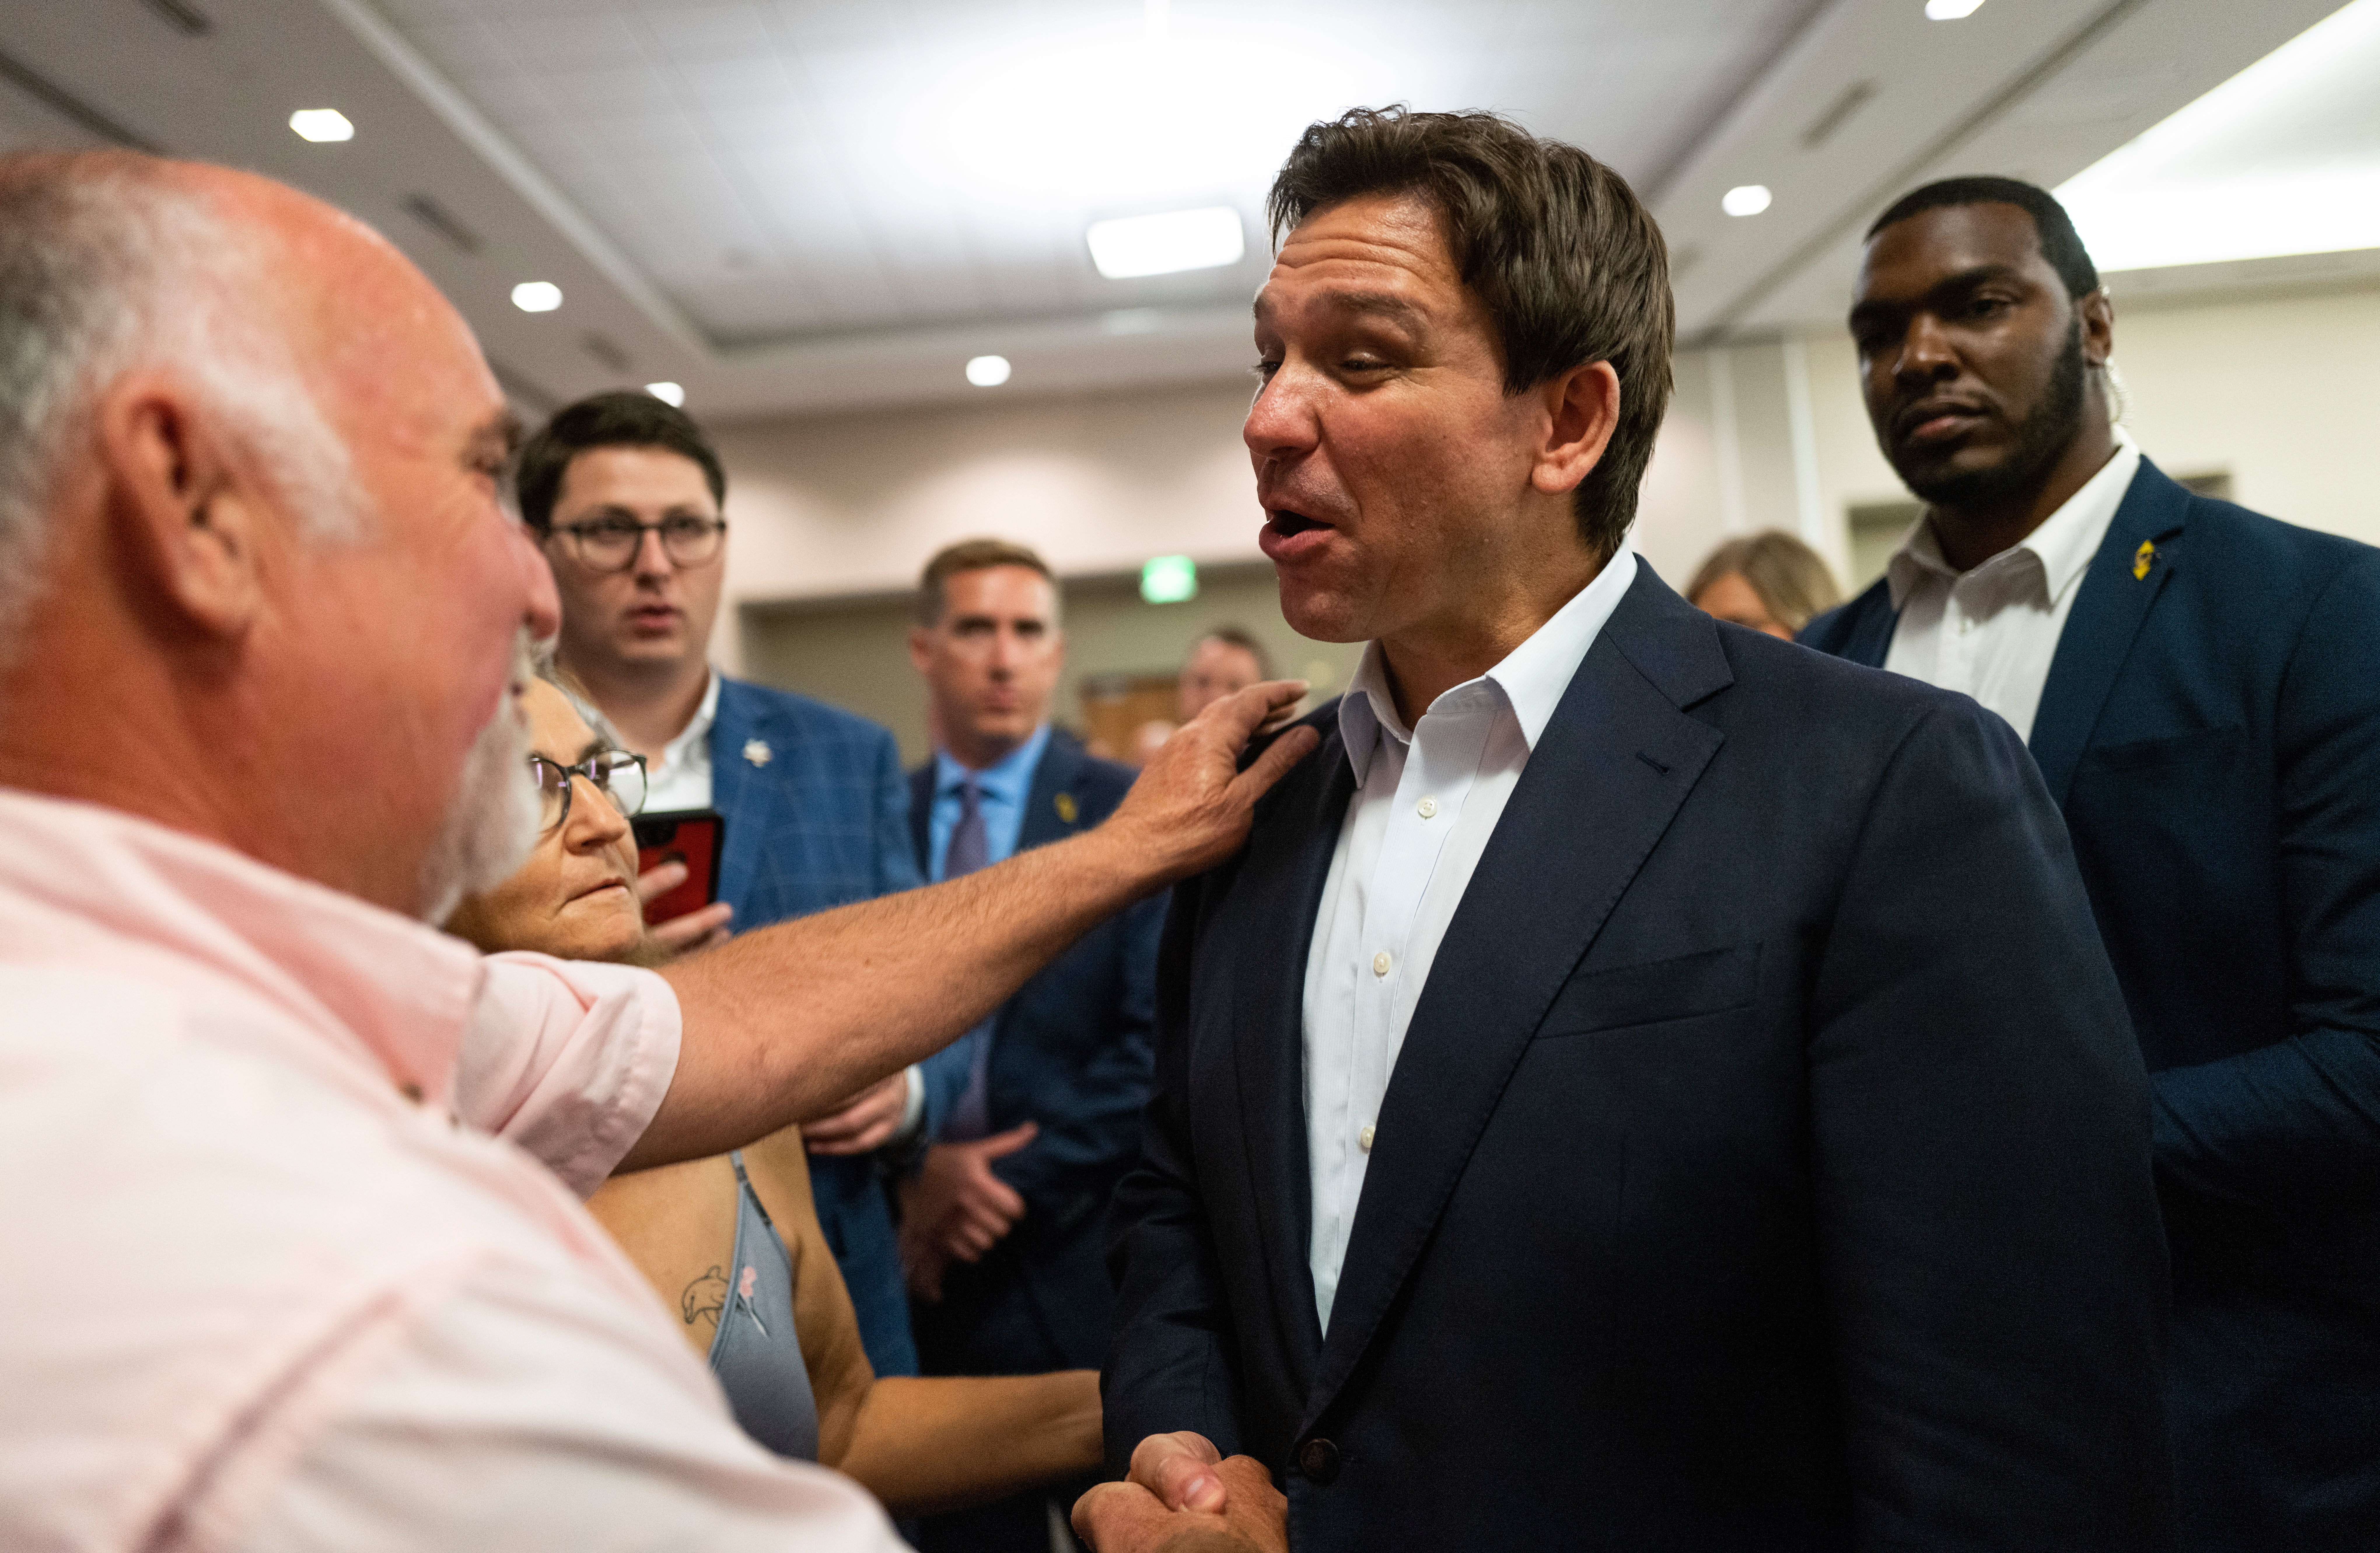 Florida governor Ron DeSantis speaks with attendees during an Iowa GOP reception on 13 May 2023 in Cedar Rapids, Iowa